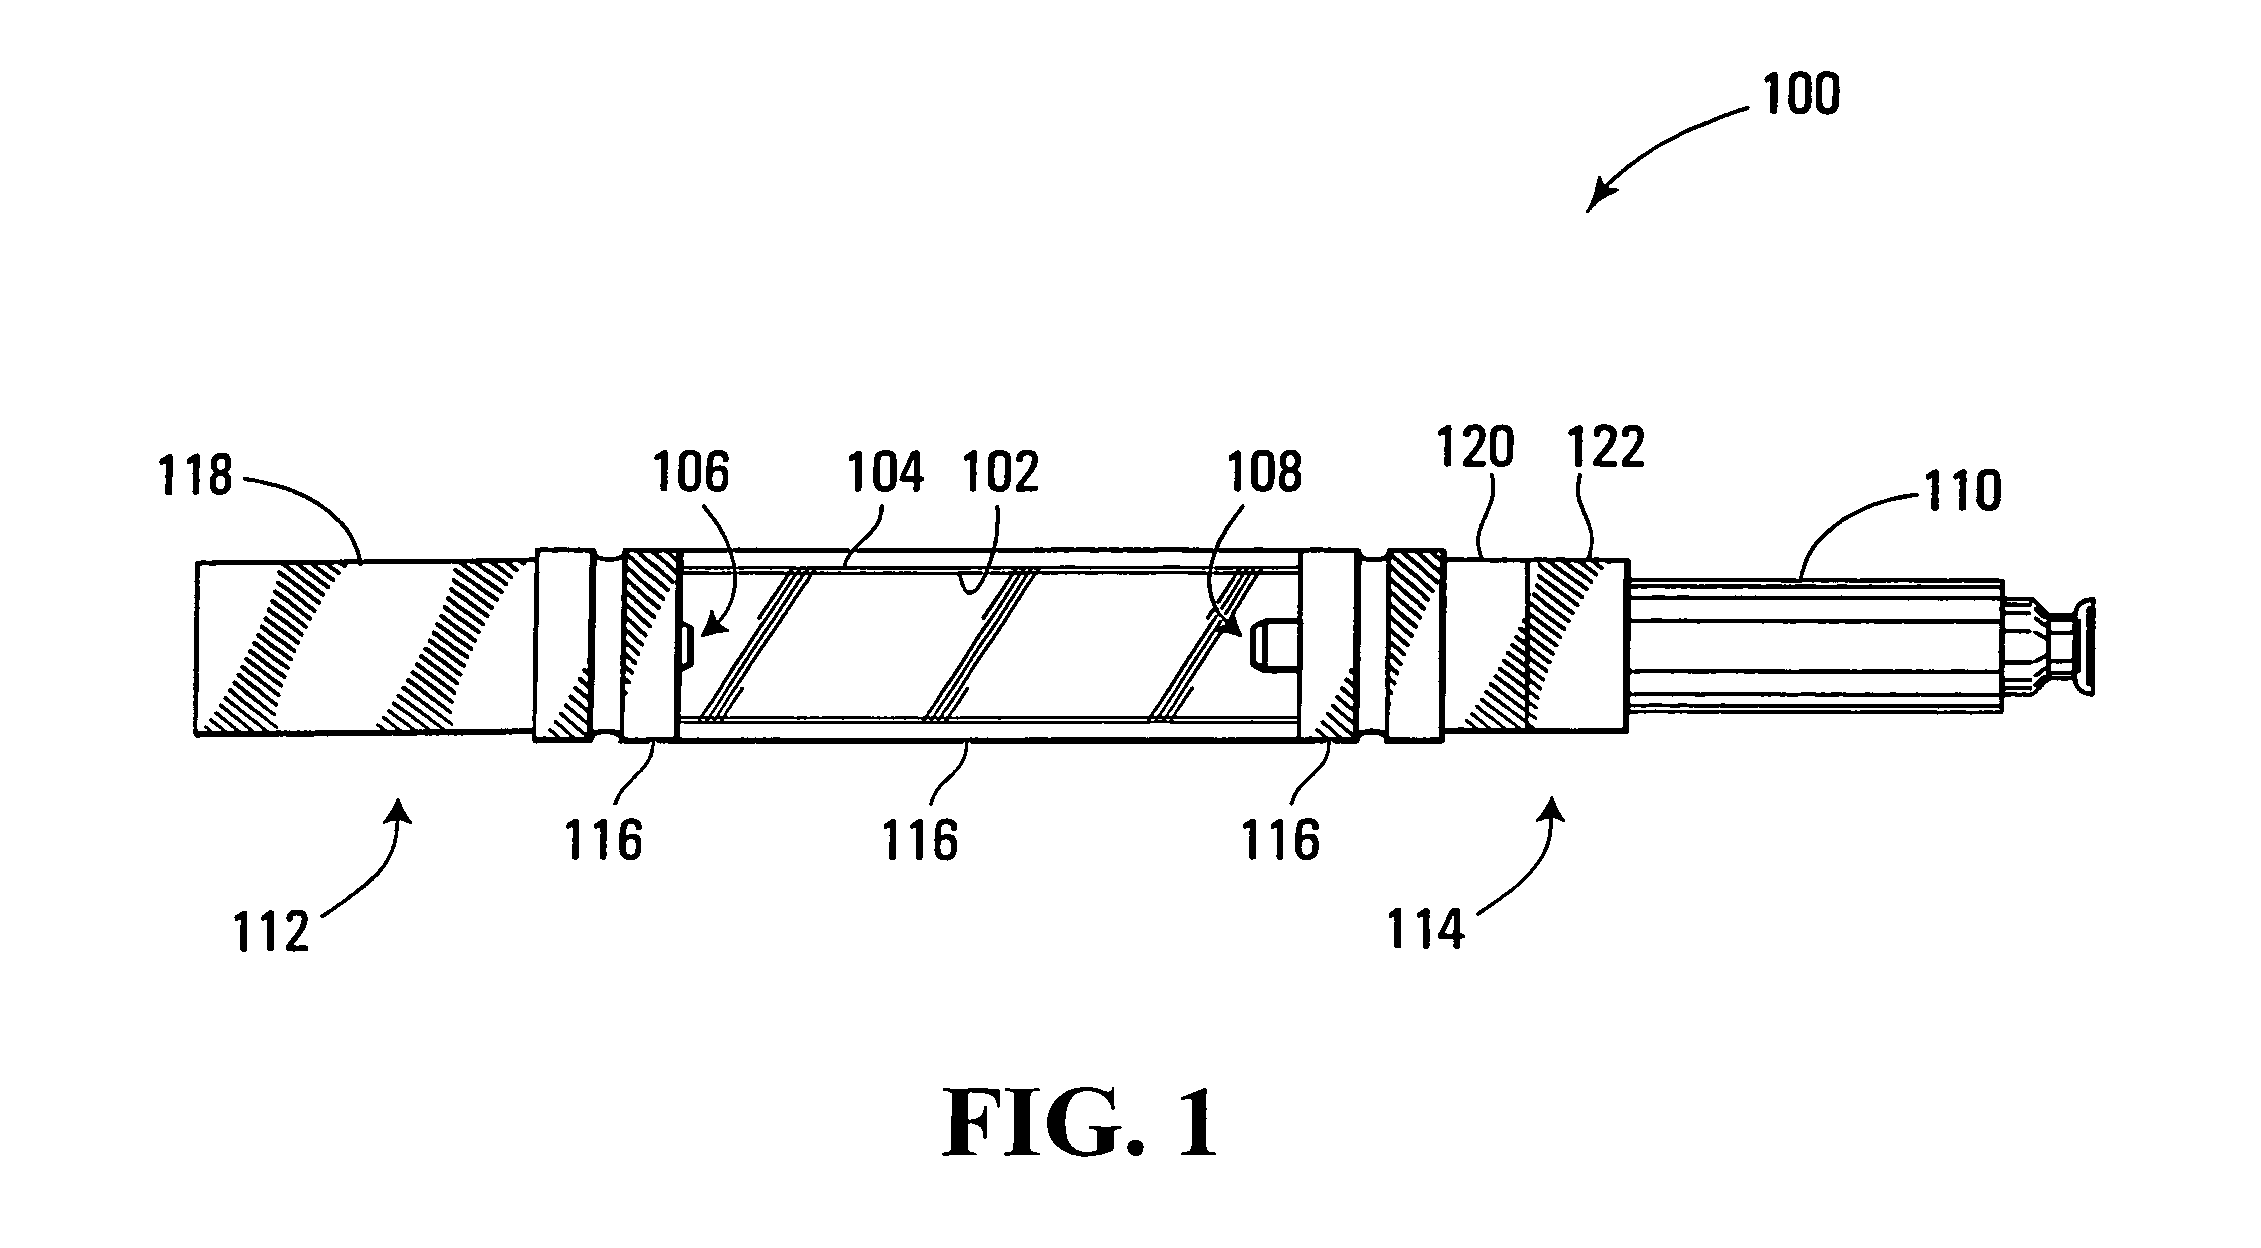 Apparatus and methods for producing electromagnetic radiation